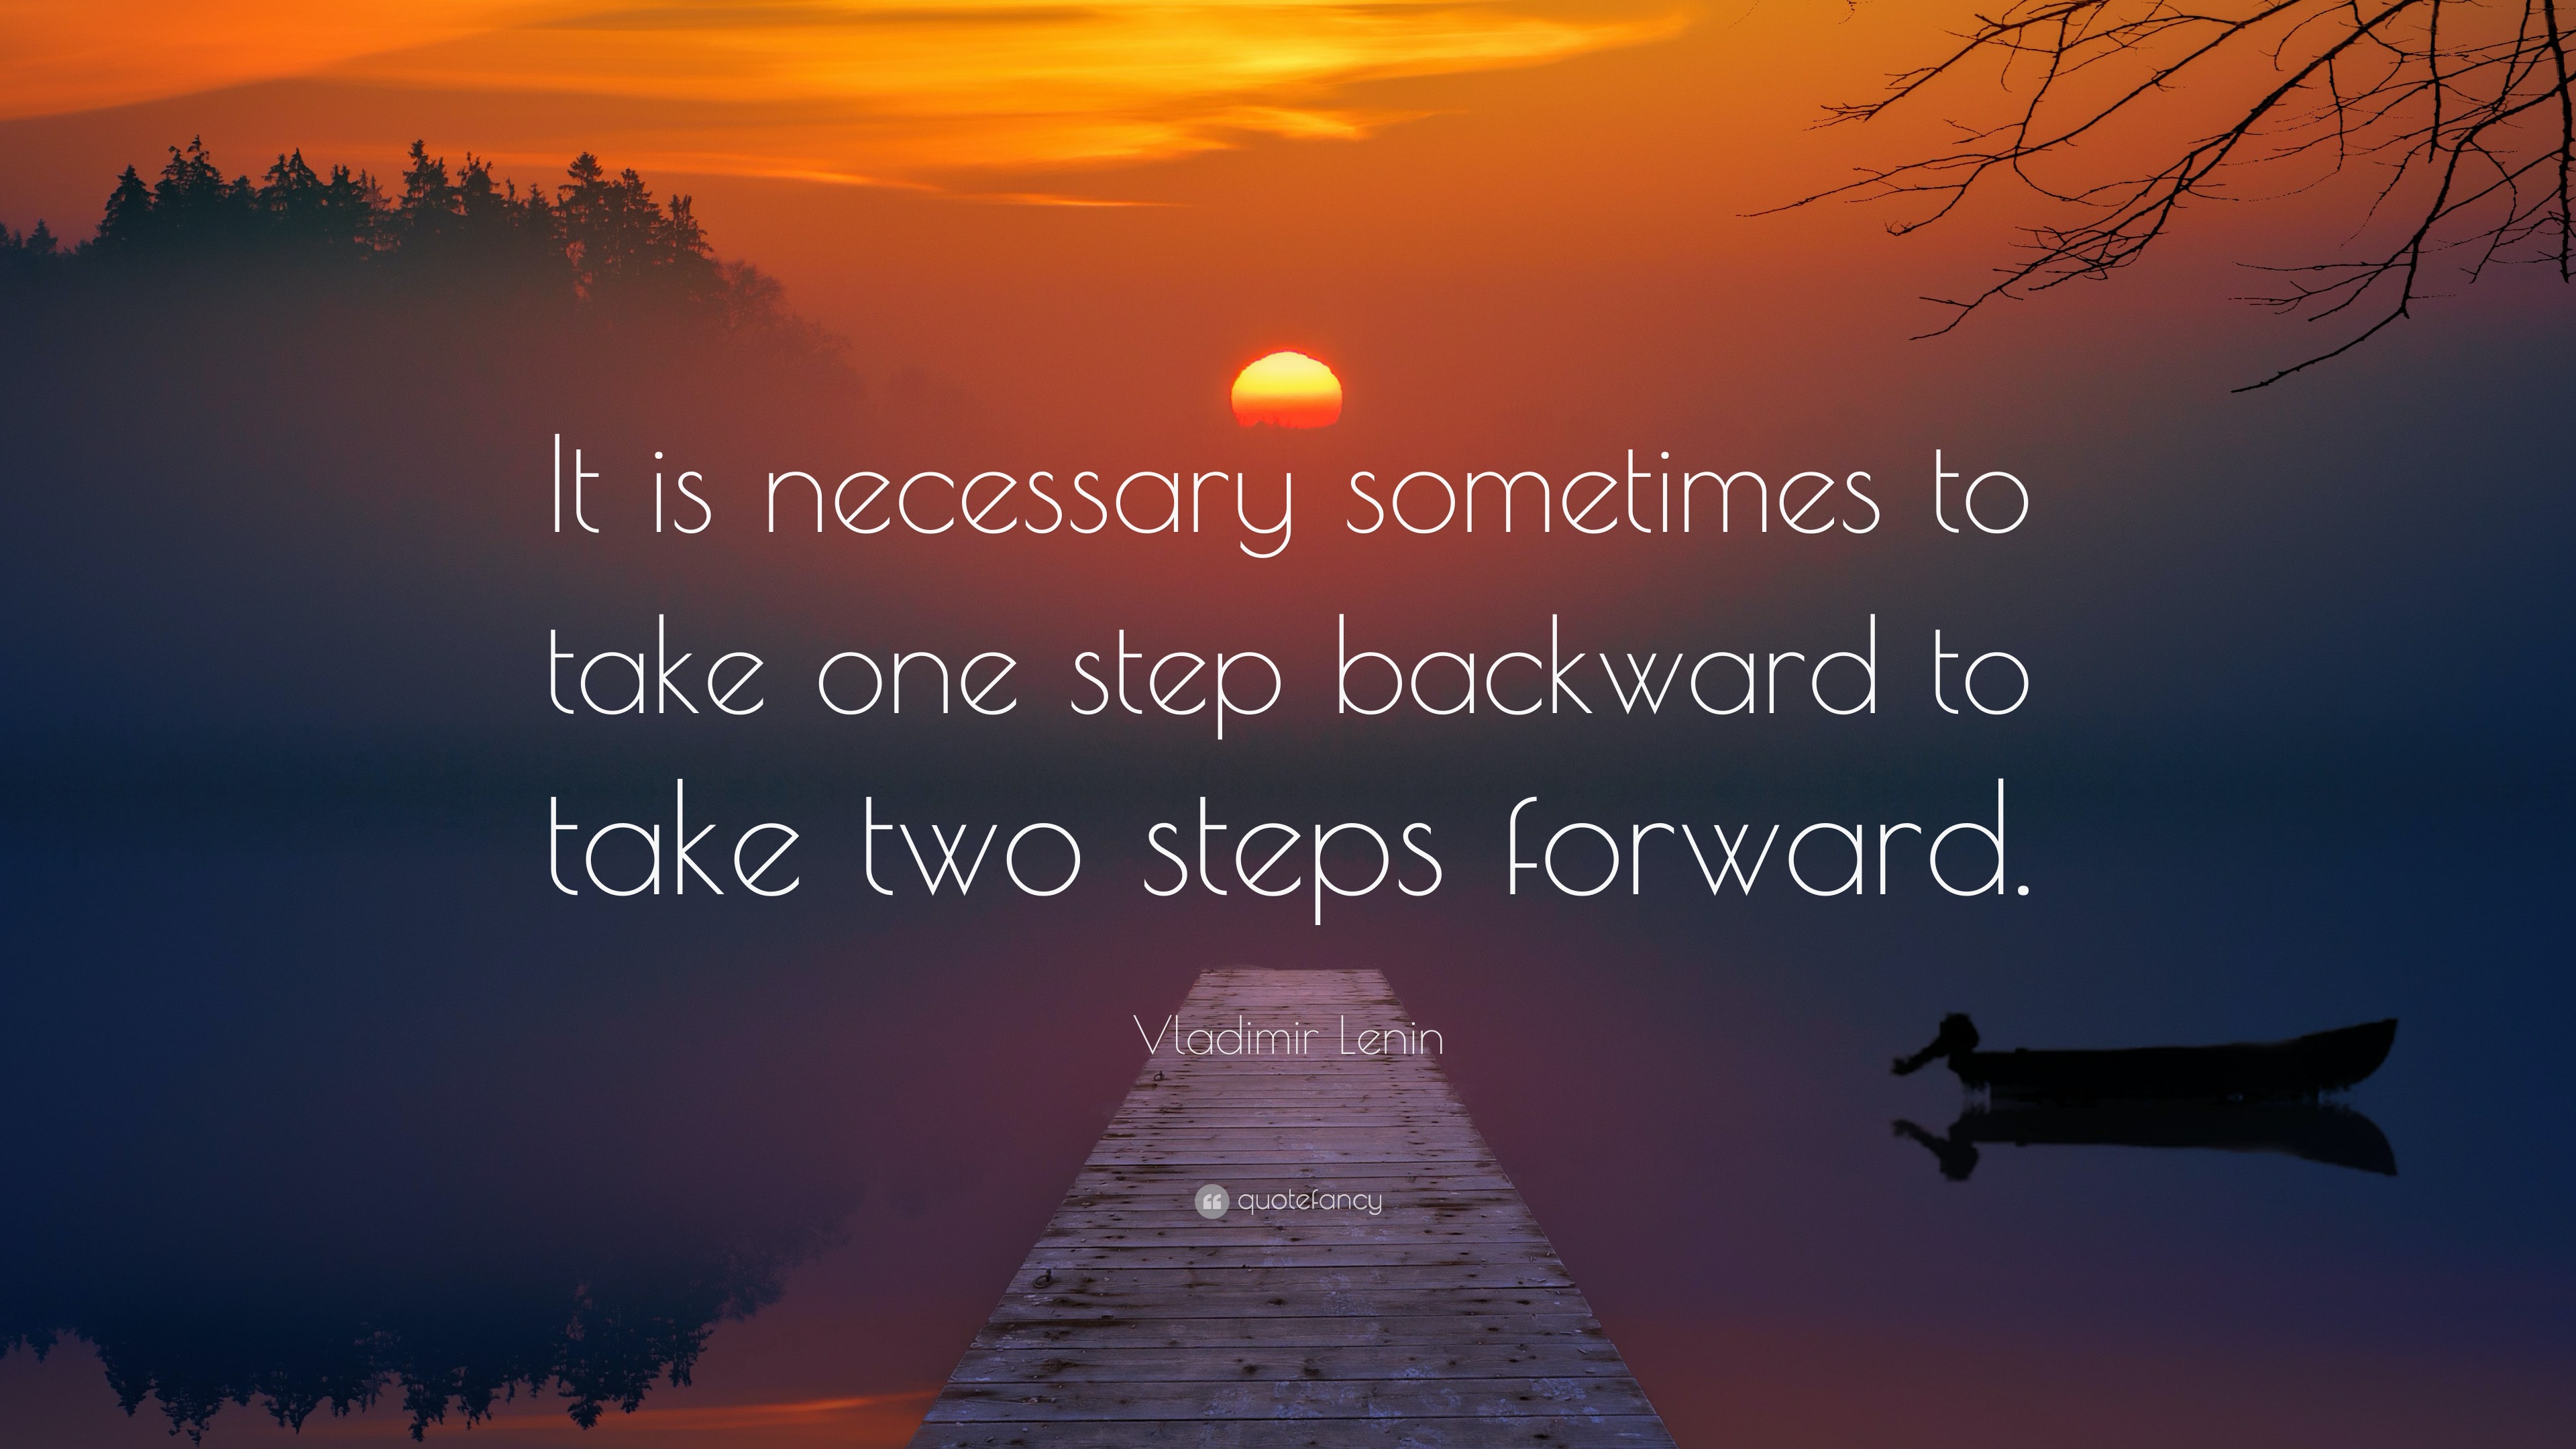 Vladimir Quote: “It is necessary sometimes to take step backward to take steps